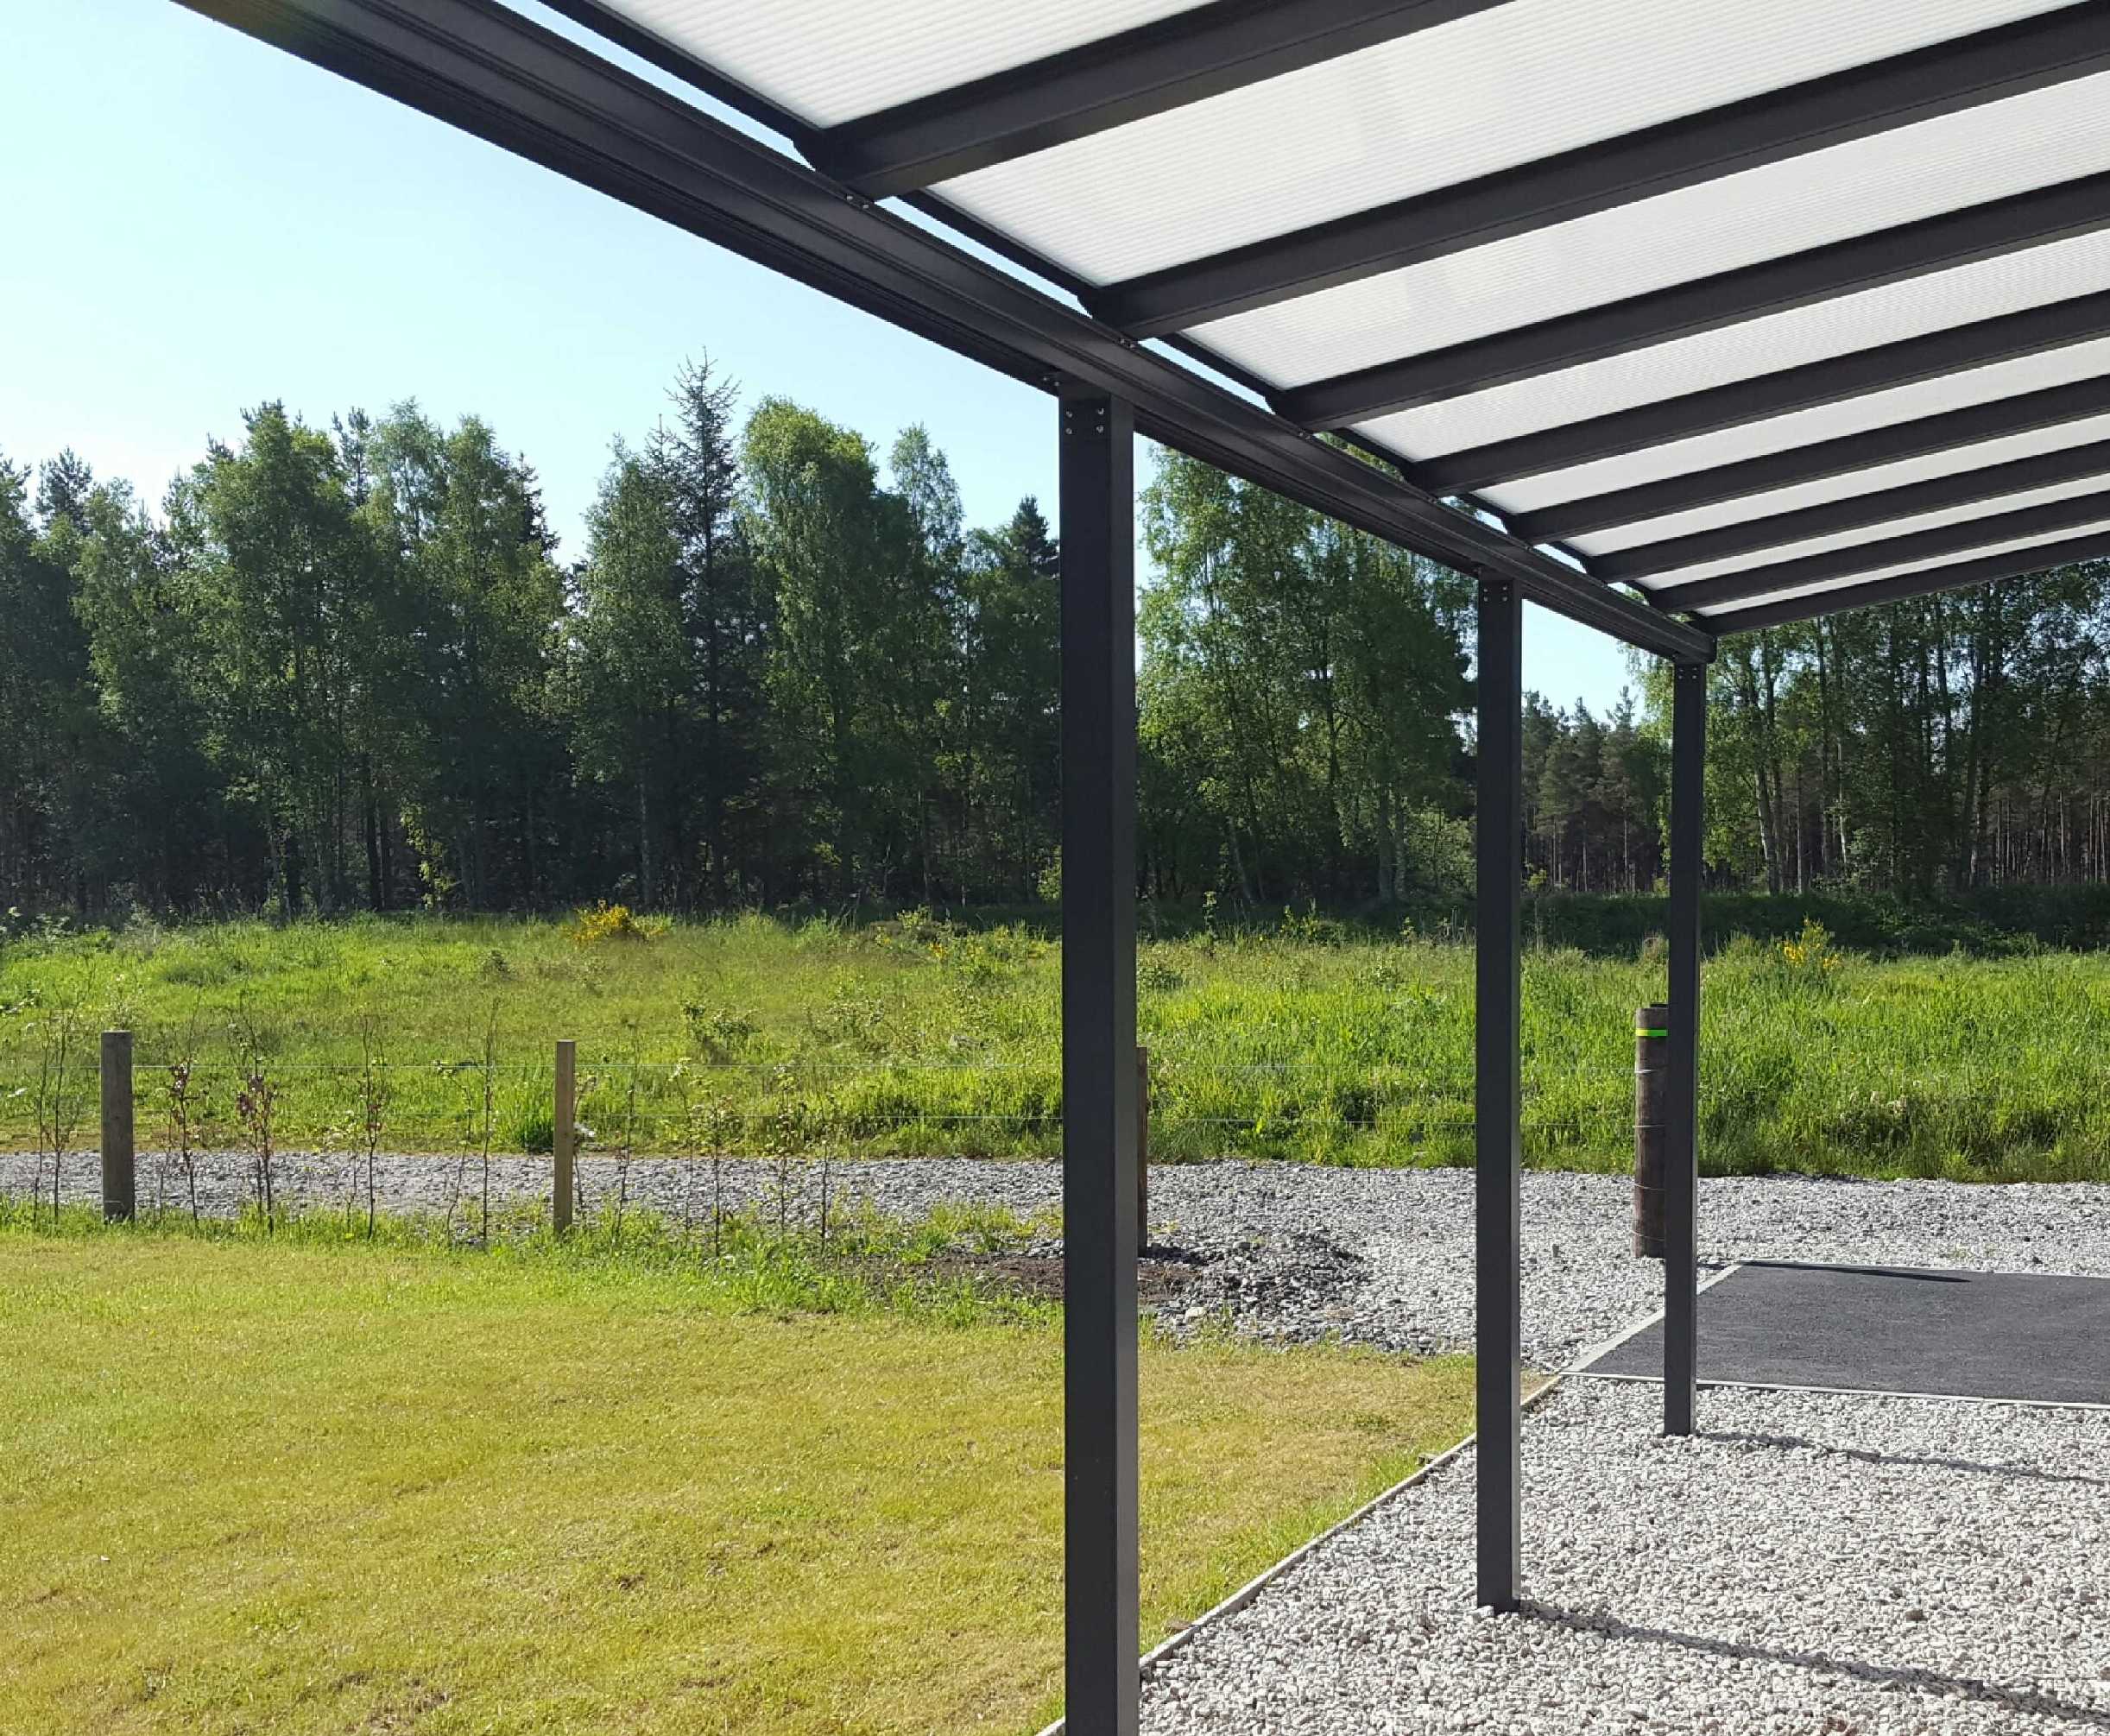 Omega Smart Lean-To Canopy, Anthracite Grey, 6mm Glass Clear Plate Polycarbonate Glazing - 7.7m (W) x 2.0m (P), (4) Supporting Posts